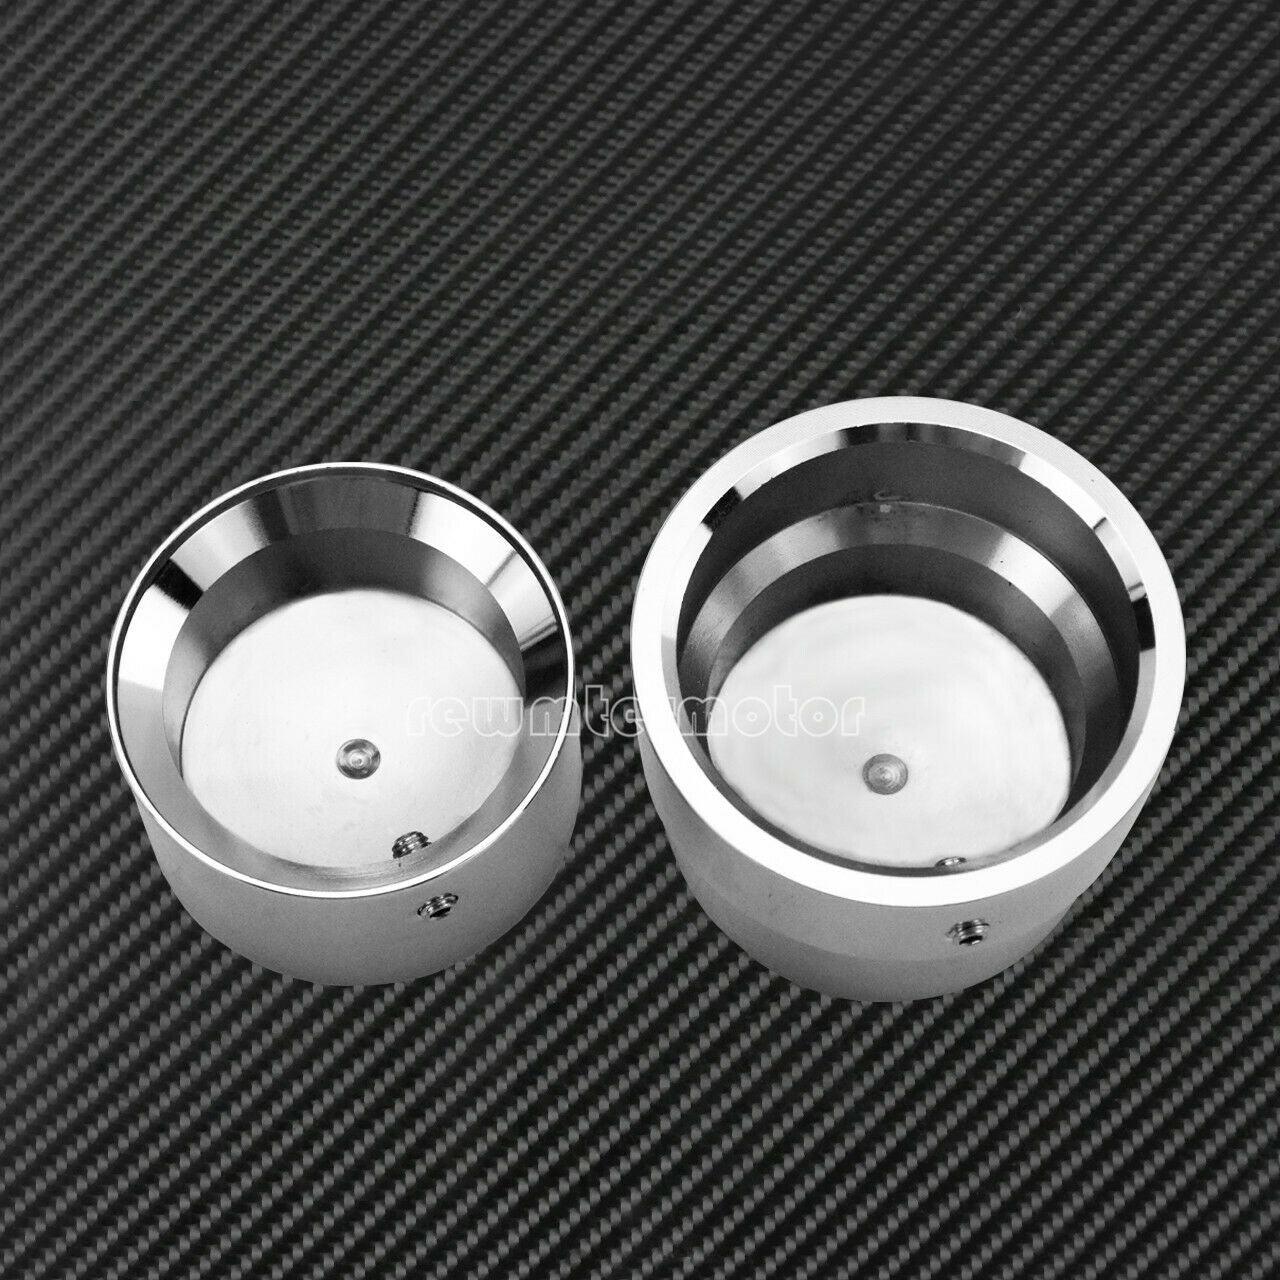 Chrome Rear Axle Nut Cover Cap Fit For Harley Dyna Super Glide Heritage Softail - Moto Life Products